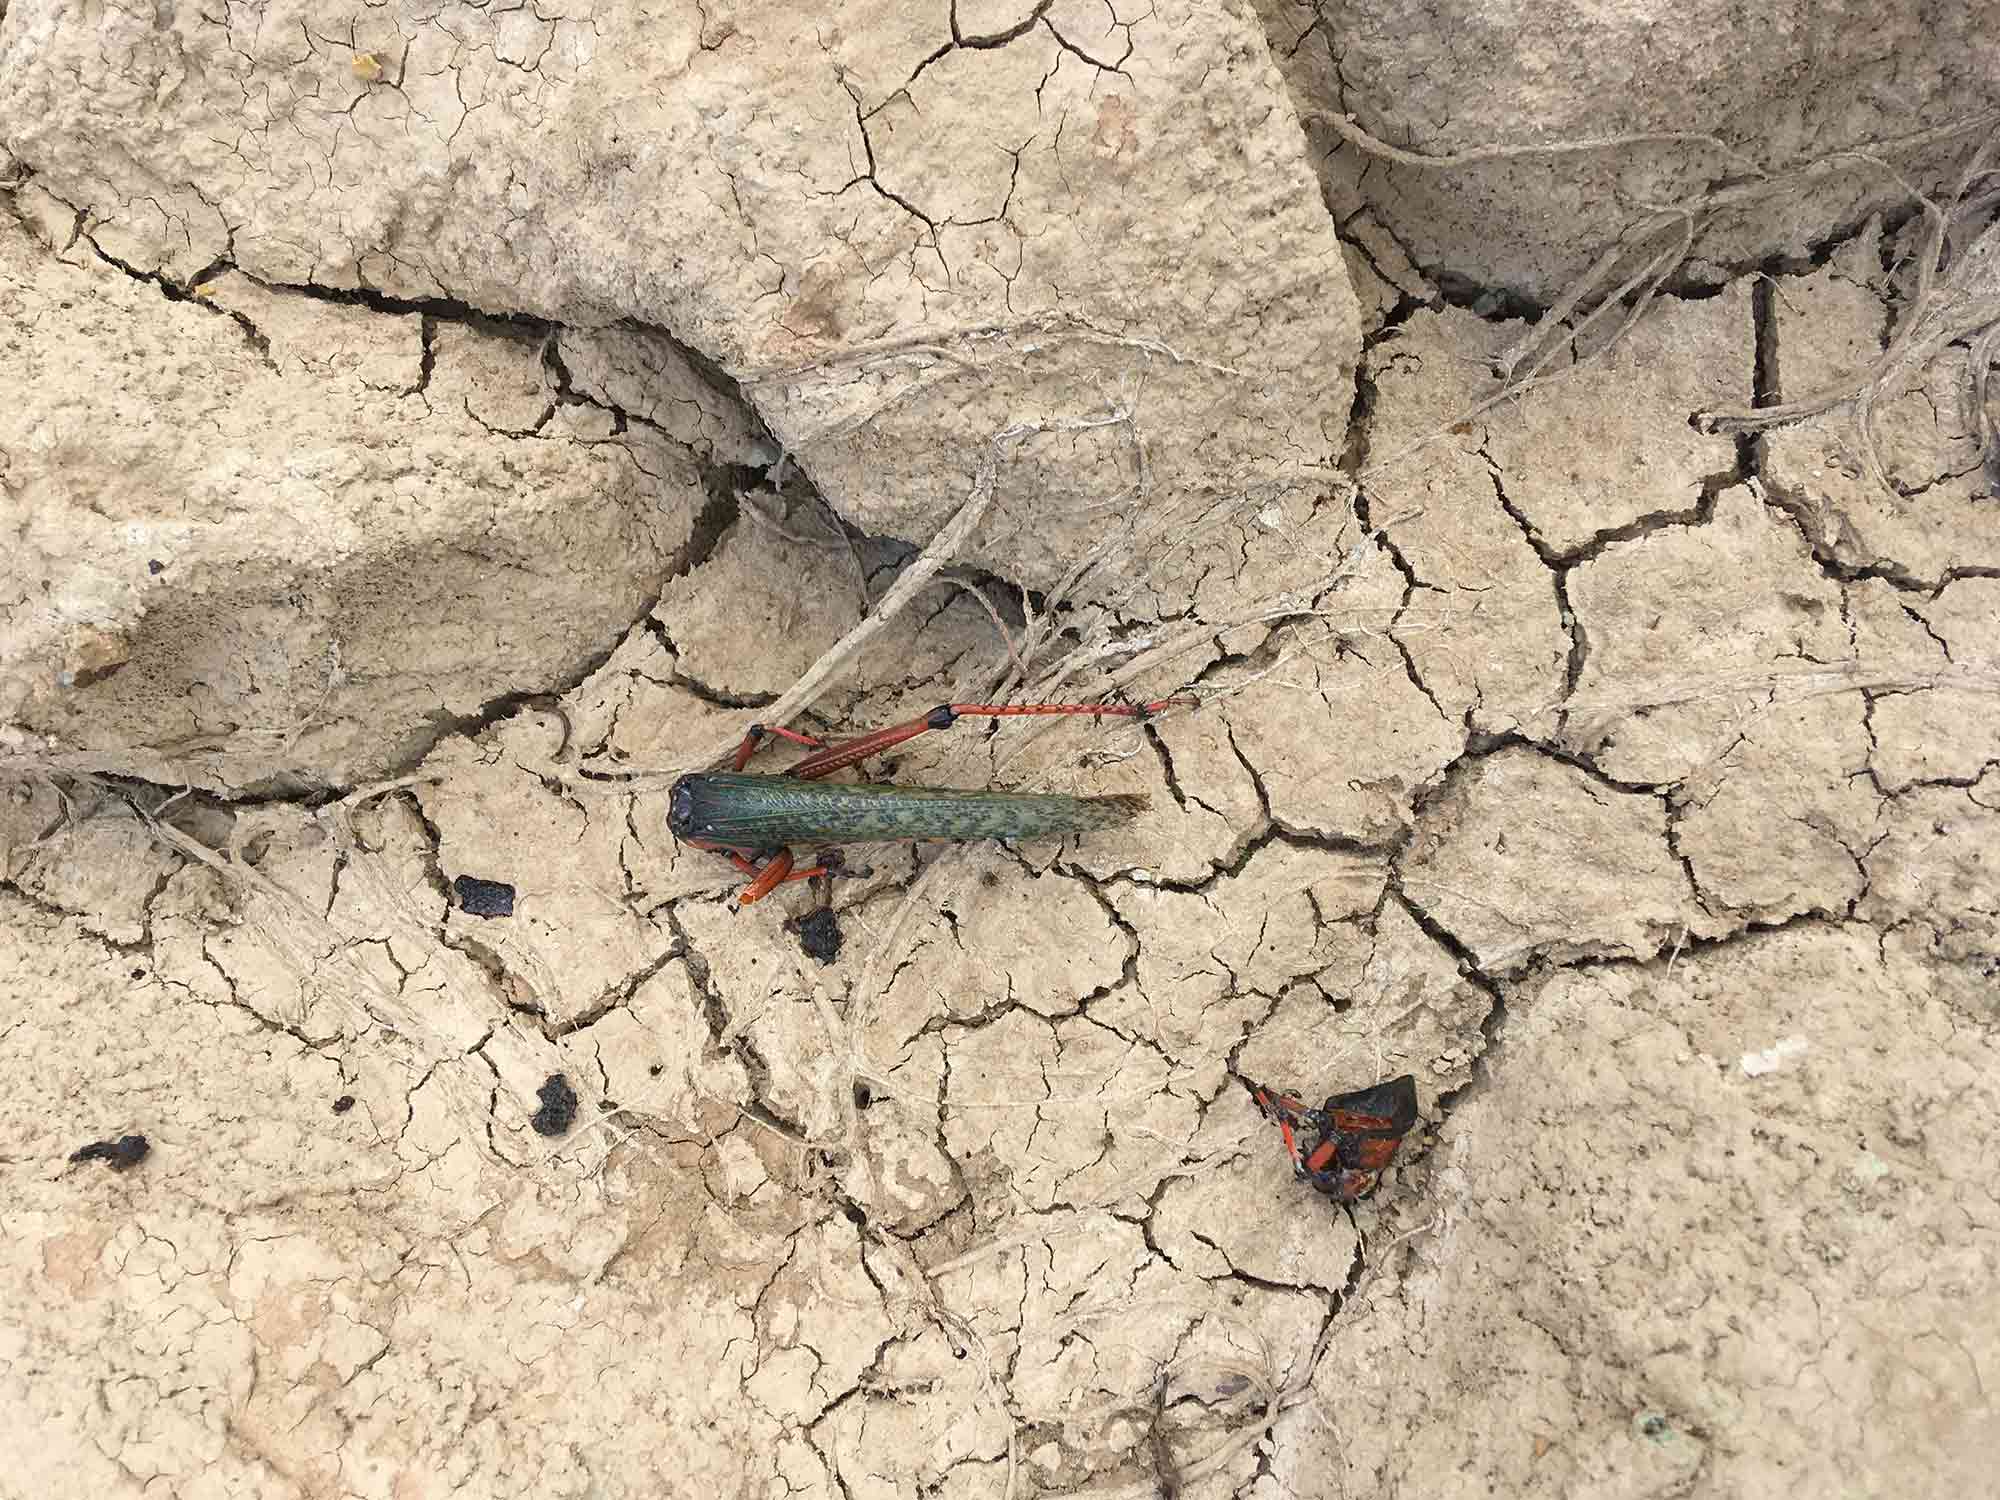 Decapitated River / Cerrejon coal mine in Colombia has diverted the River Bruno. In this international delegation to visit the works, we found the new river bed dead, as is this grasshopper on the same path (diana.salazar@ucl.ac.uk)